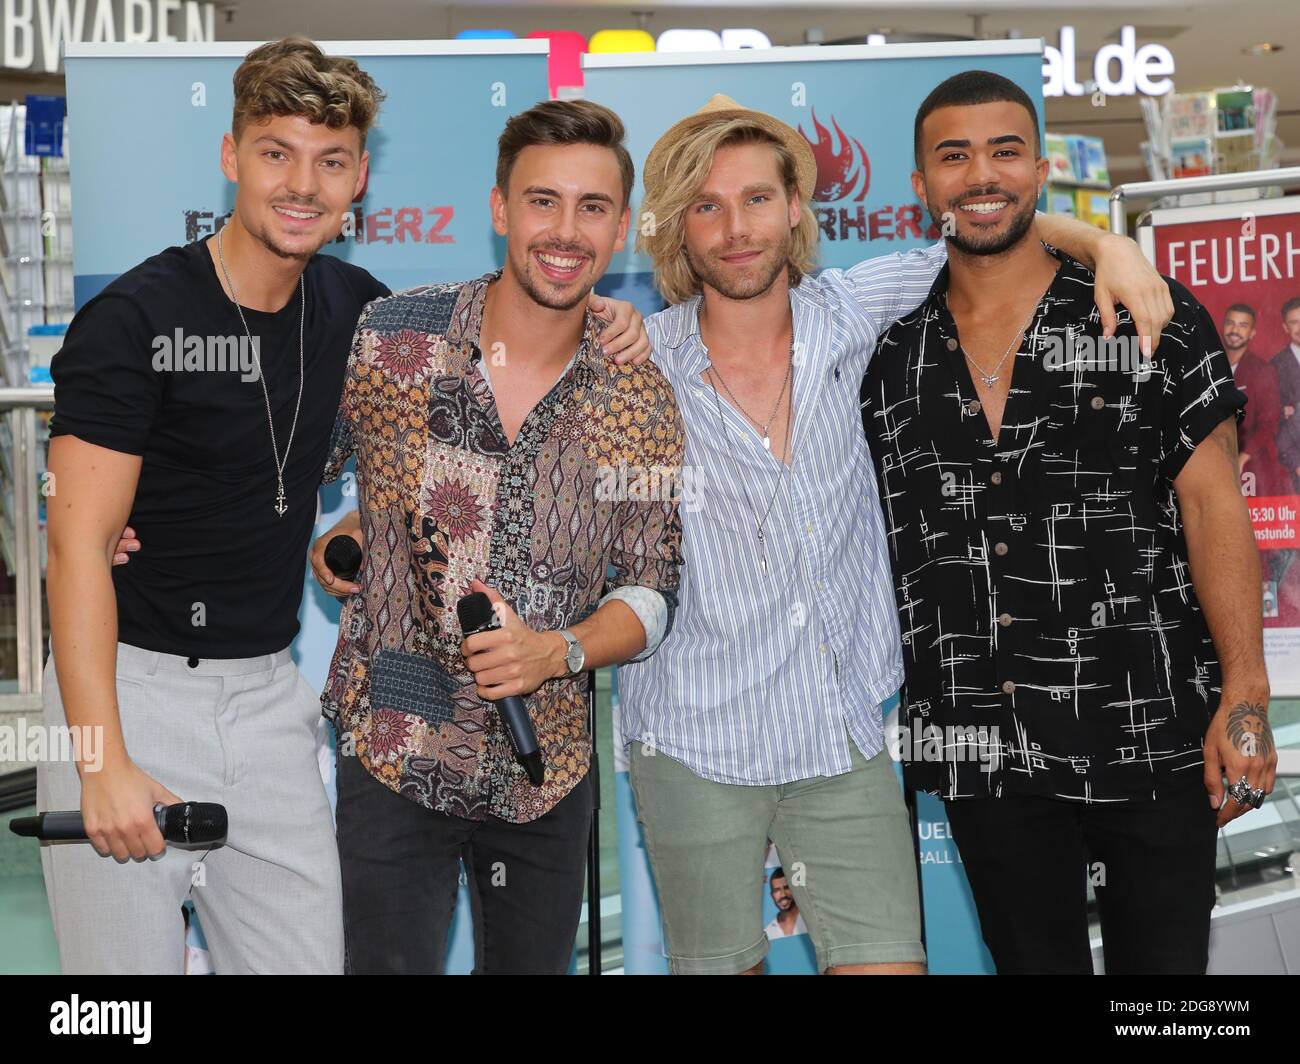 German Schlager boy group Feuerherz during an autograph session on May 29, 2018 in Magdeburg Stock Photo